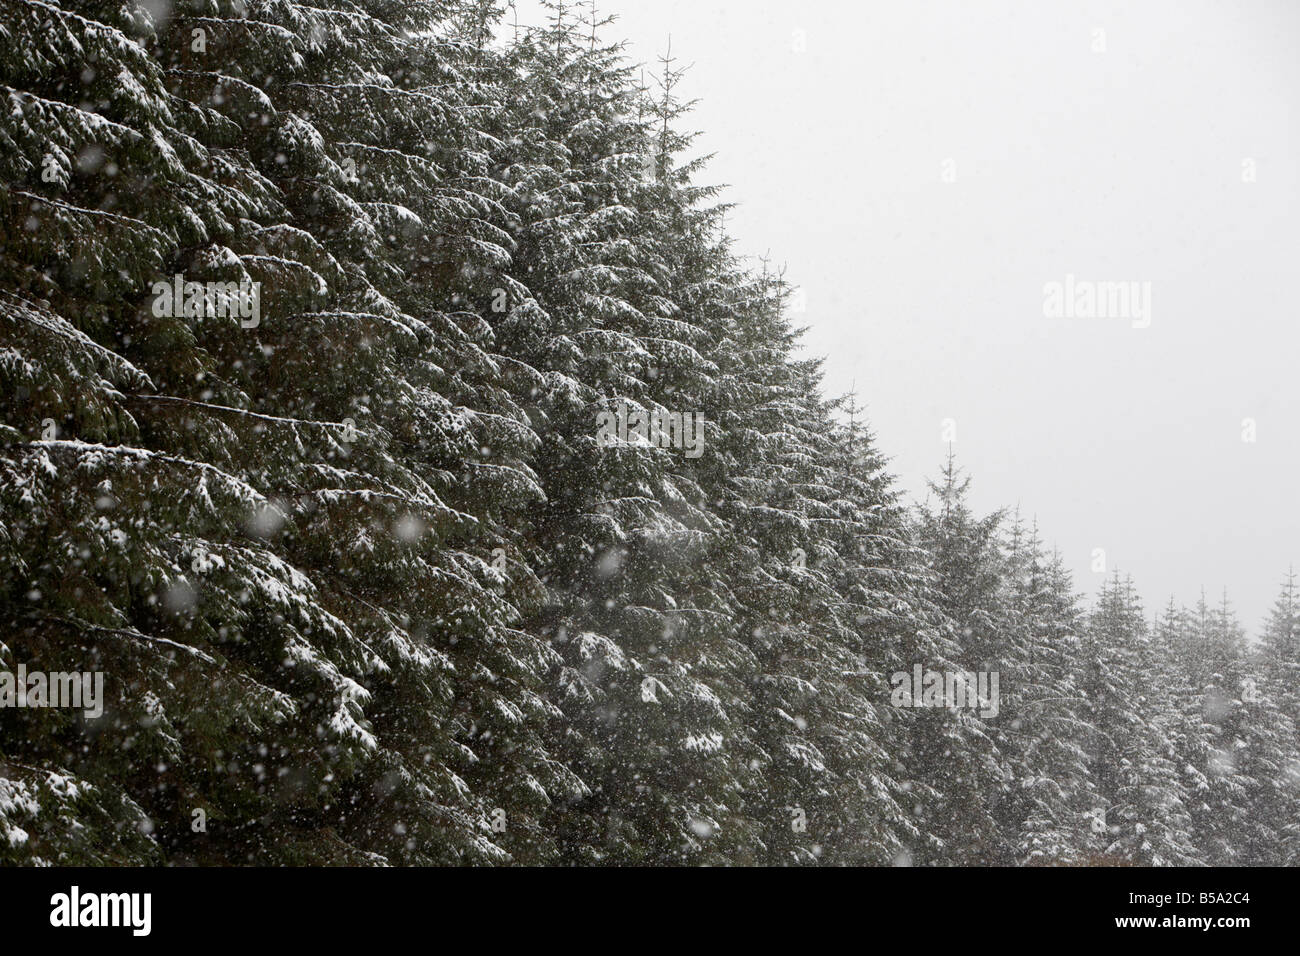 snow and ice covering conifer trees in a forest county antrim northern ireland uk Stock Photo